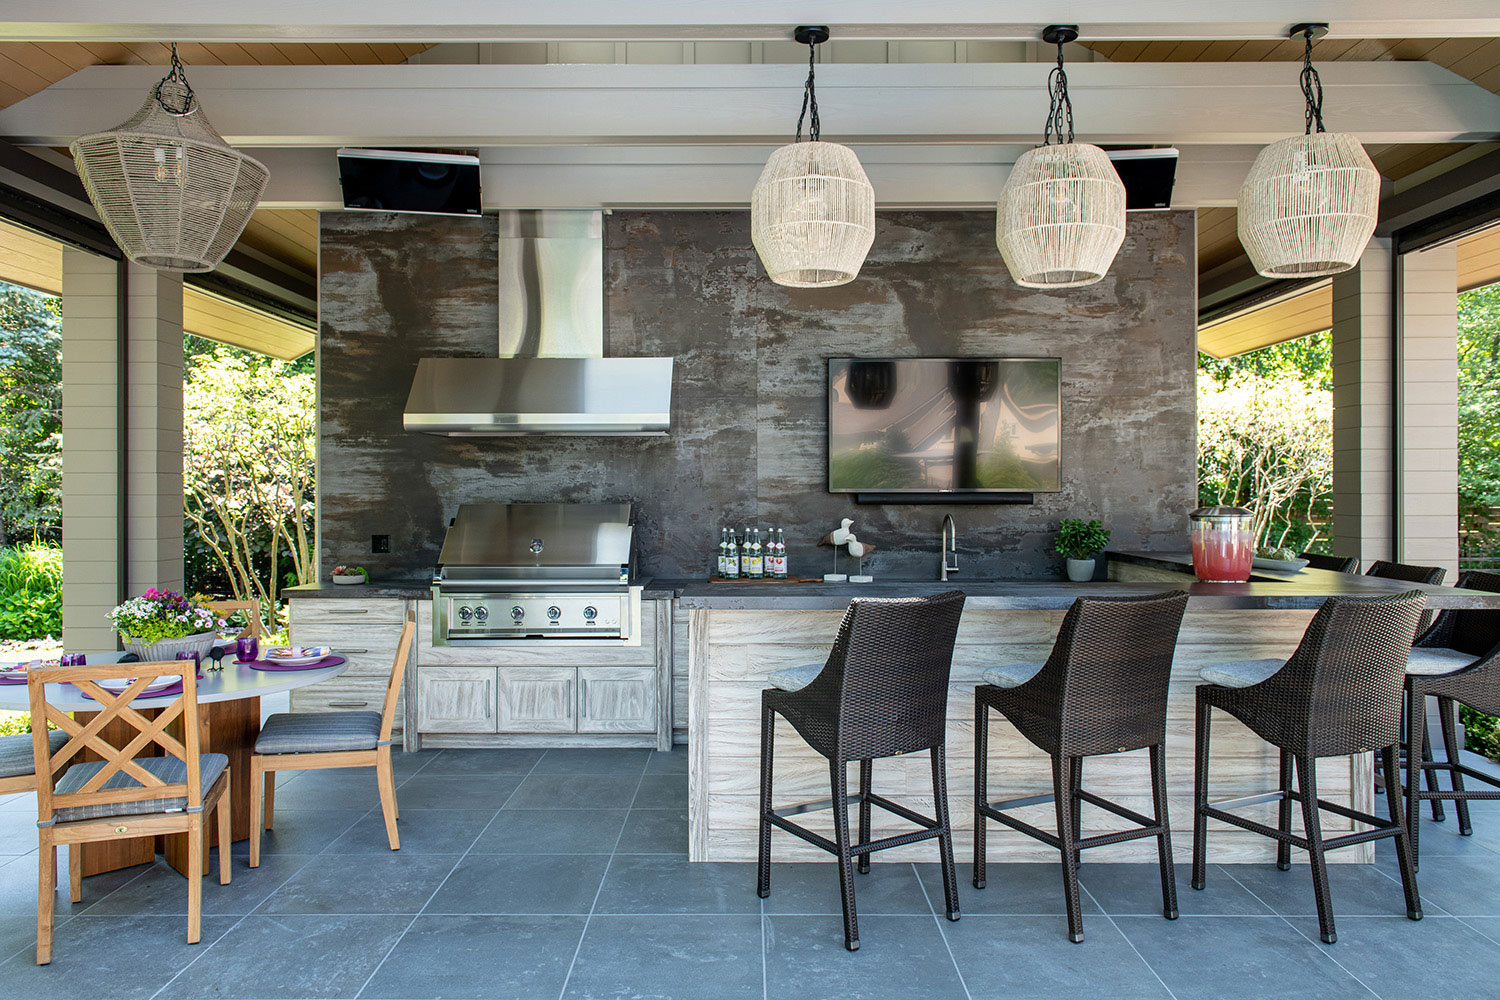 Image of Riverwoods outdoor kitchen 5 in {{A backyard oasis with a Dekton Trilium ‘wow’ factor}} - Cosentino